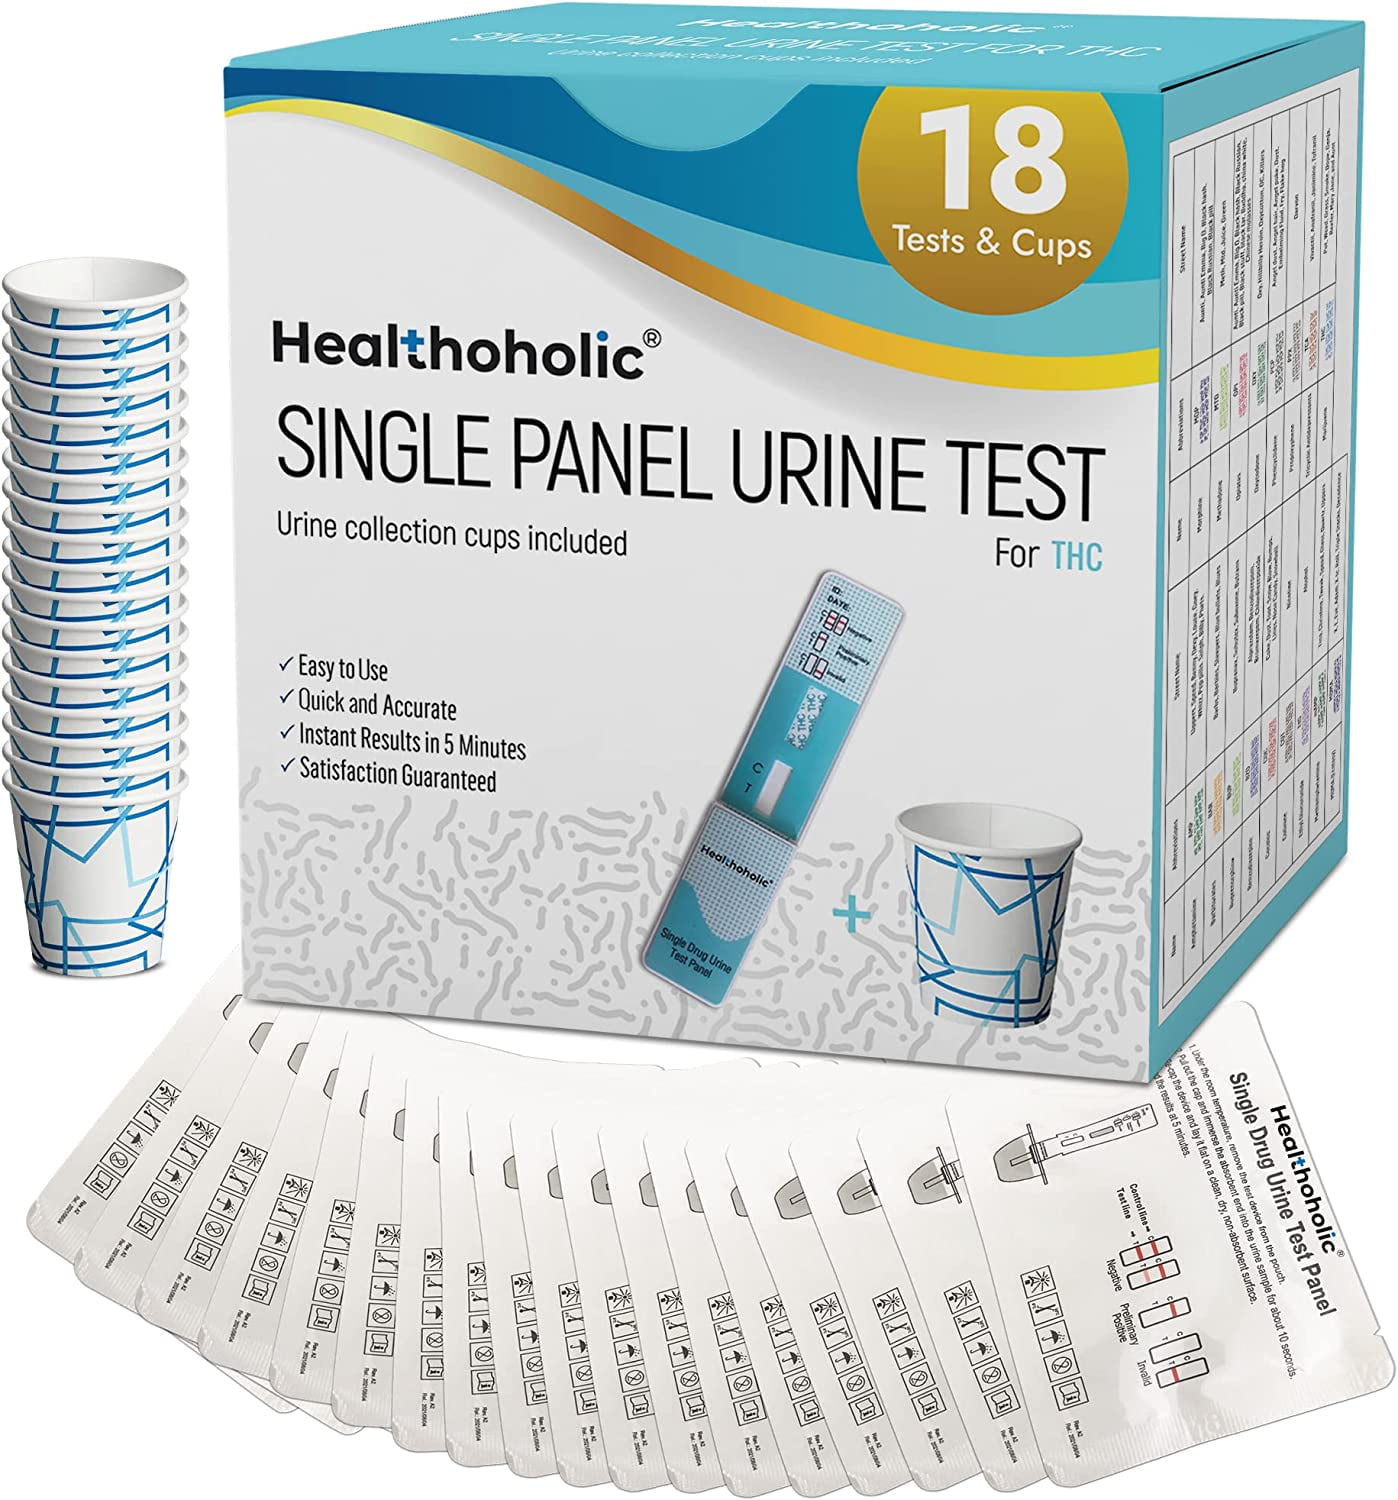 THC 15 ng/mL Home Drug Test Strips - Easy-to-use, Low Detection THC Test  Kit, Single Use (4-Pack)